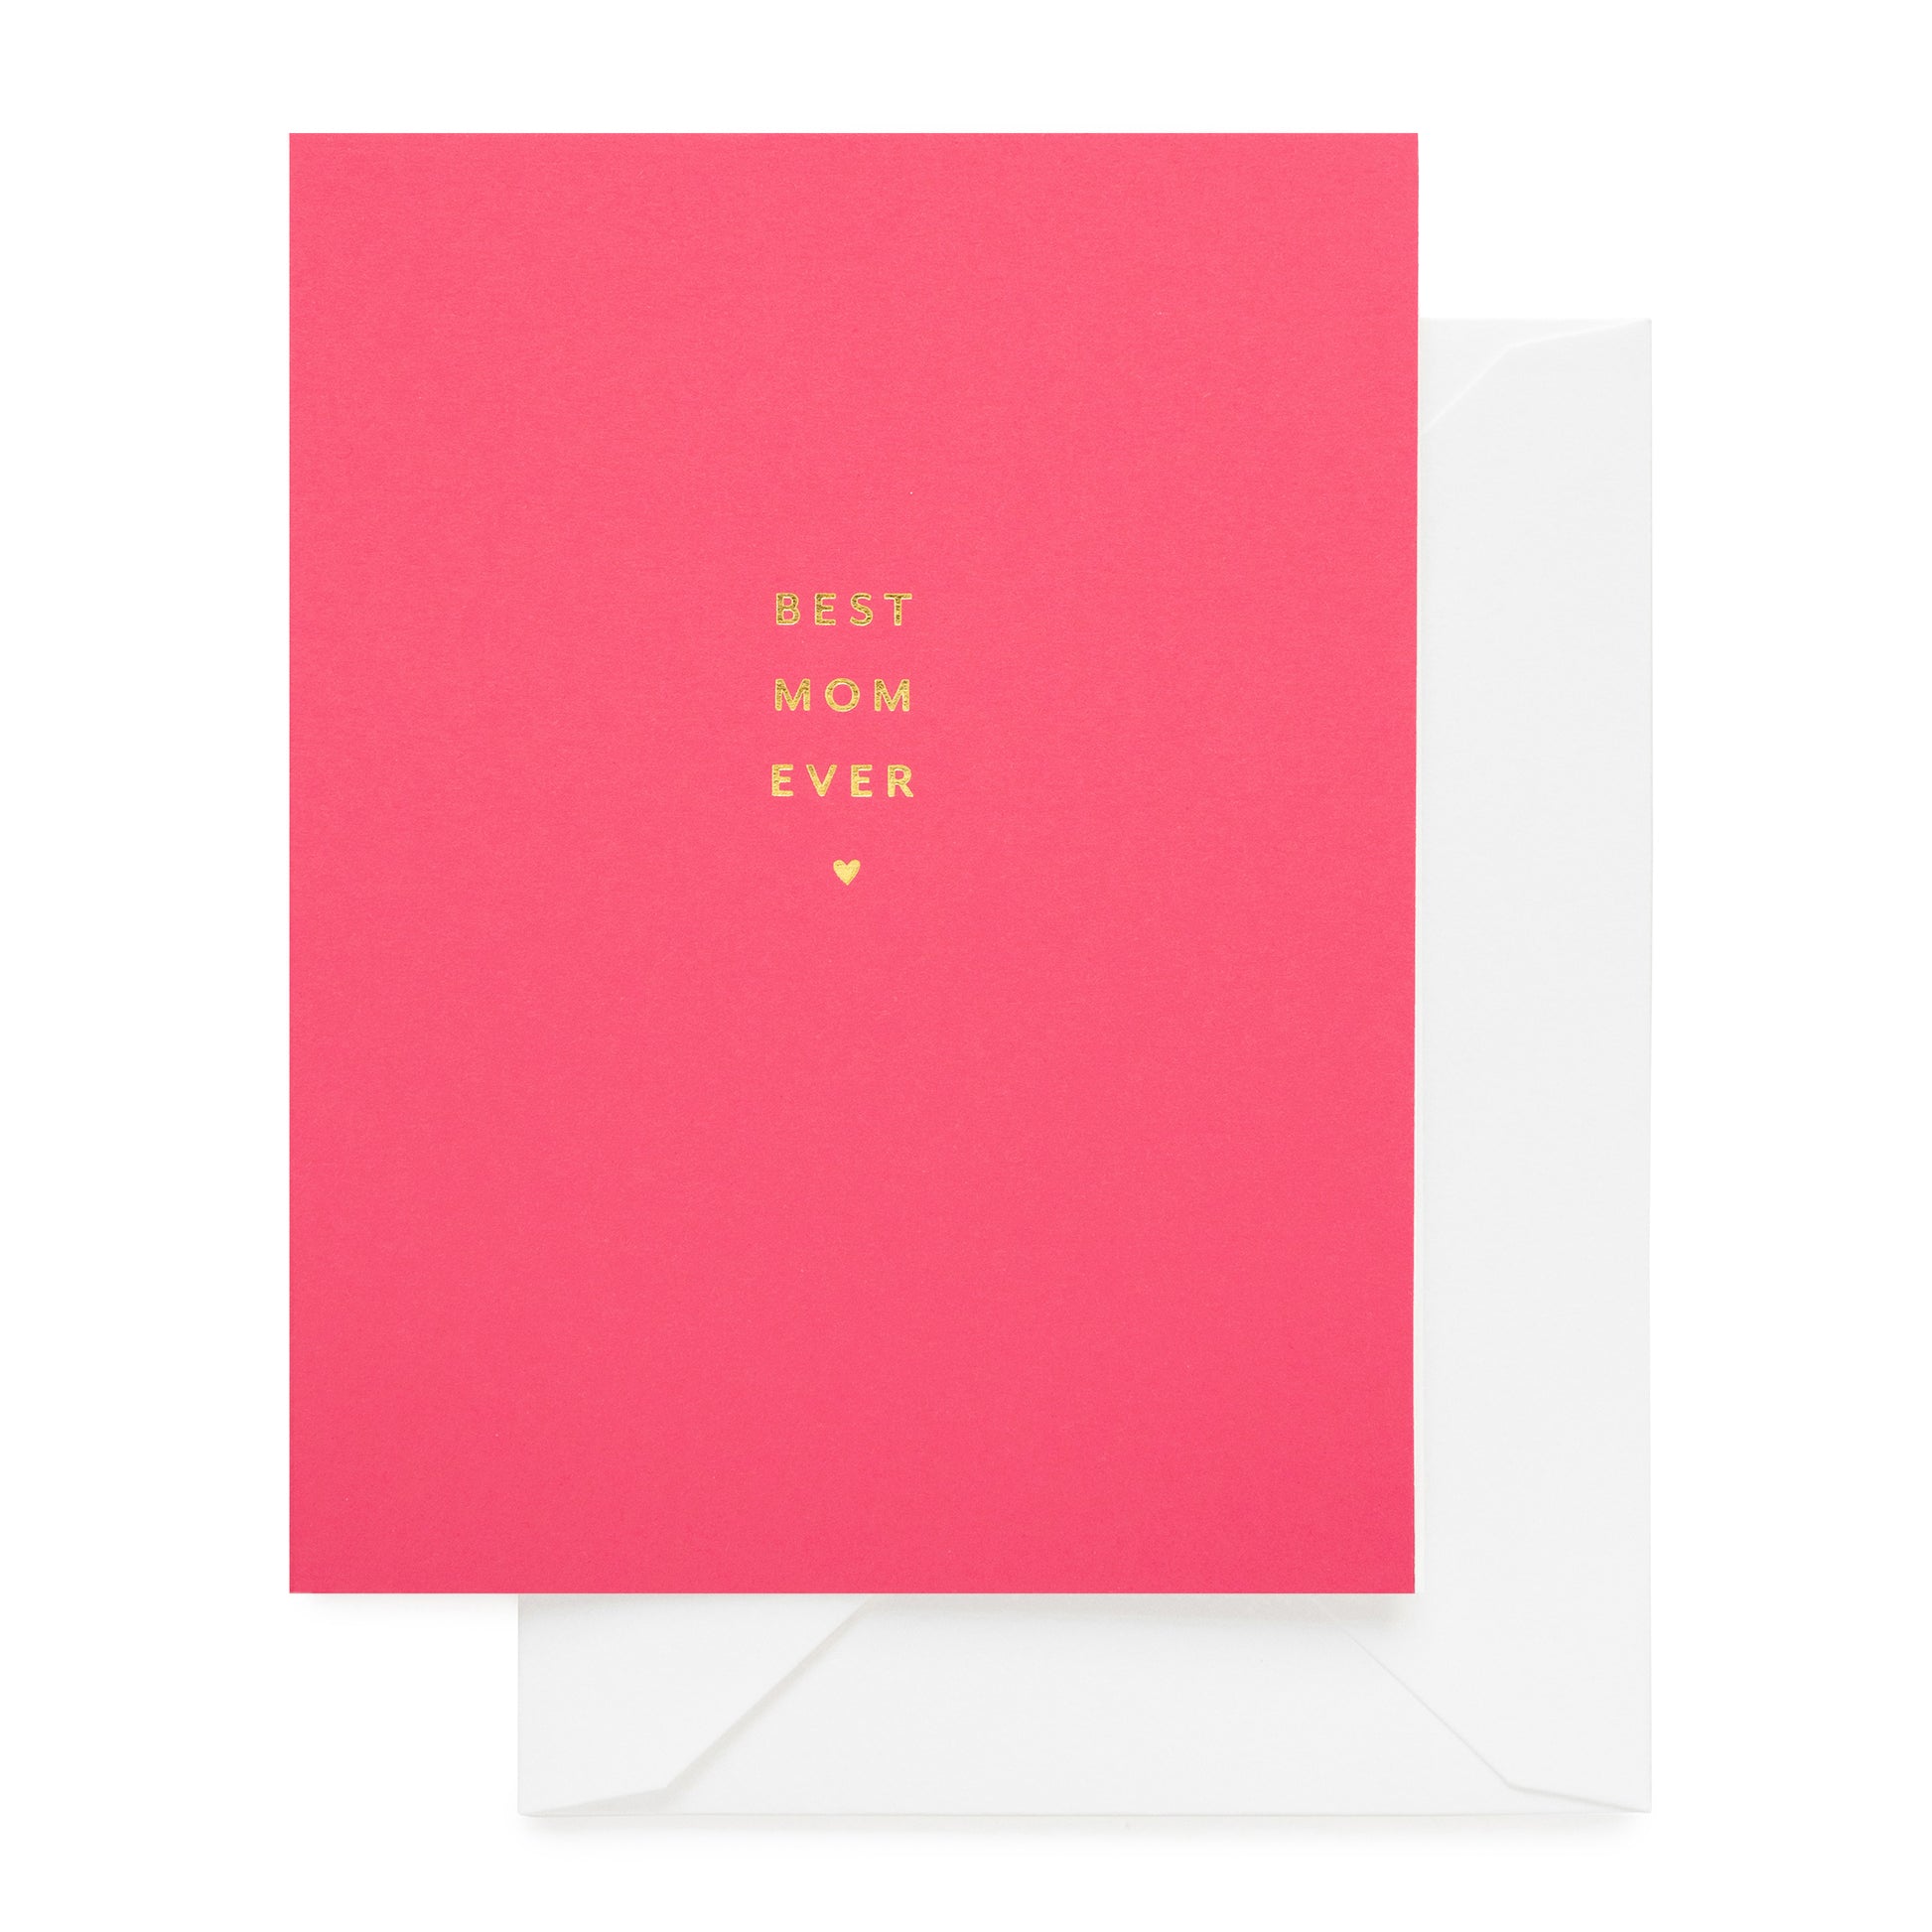 hot pink paper with gold text, white envelope